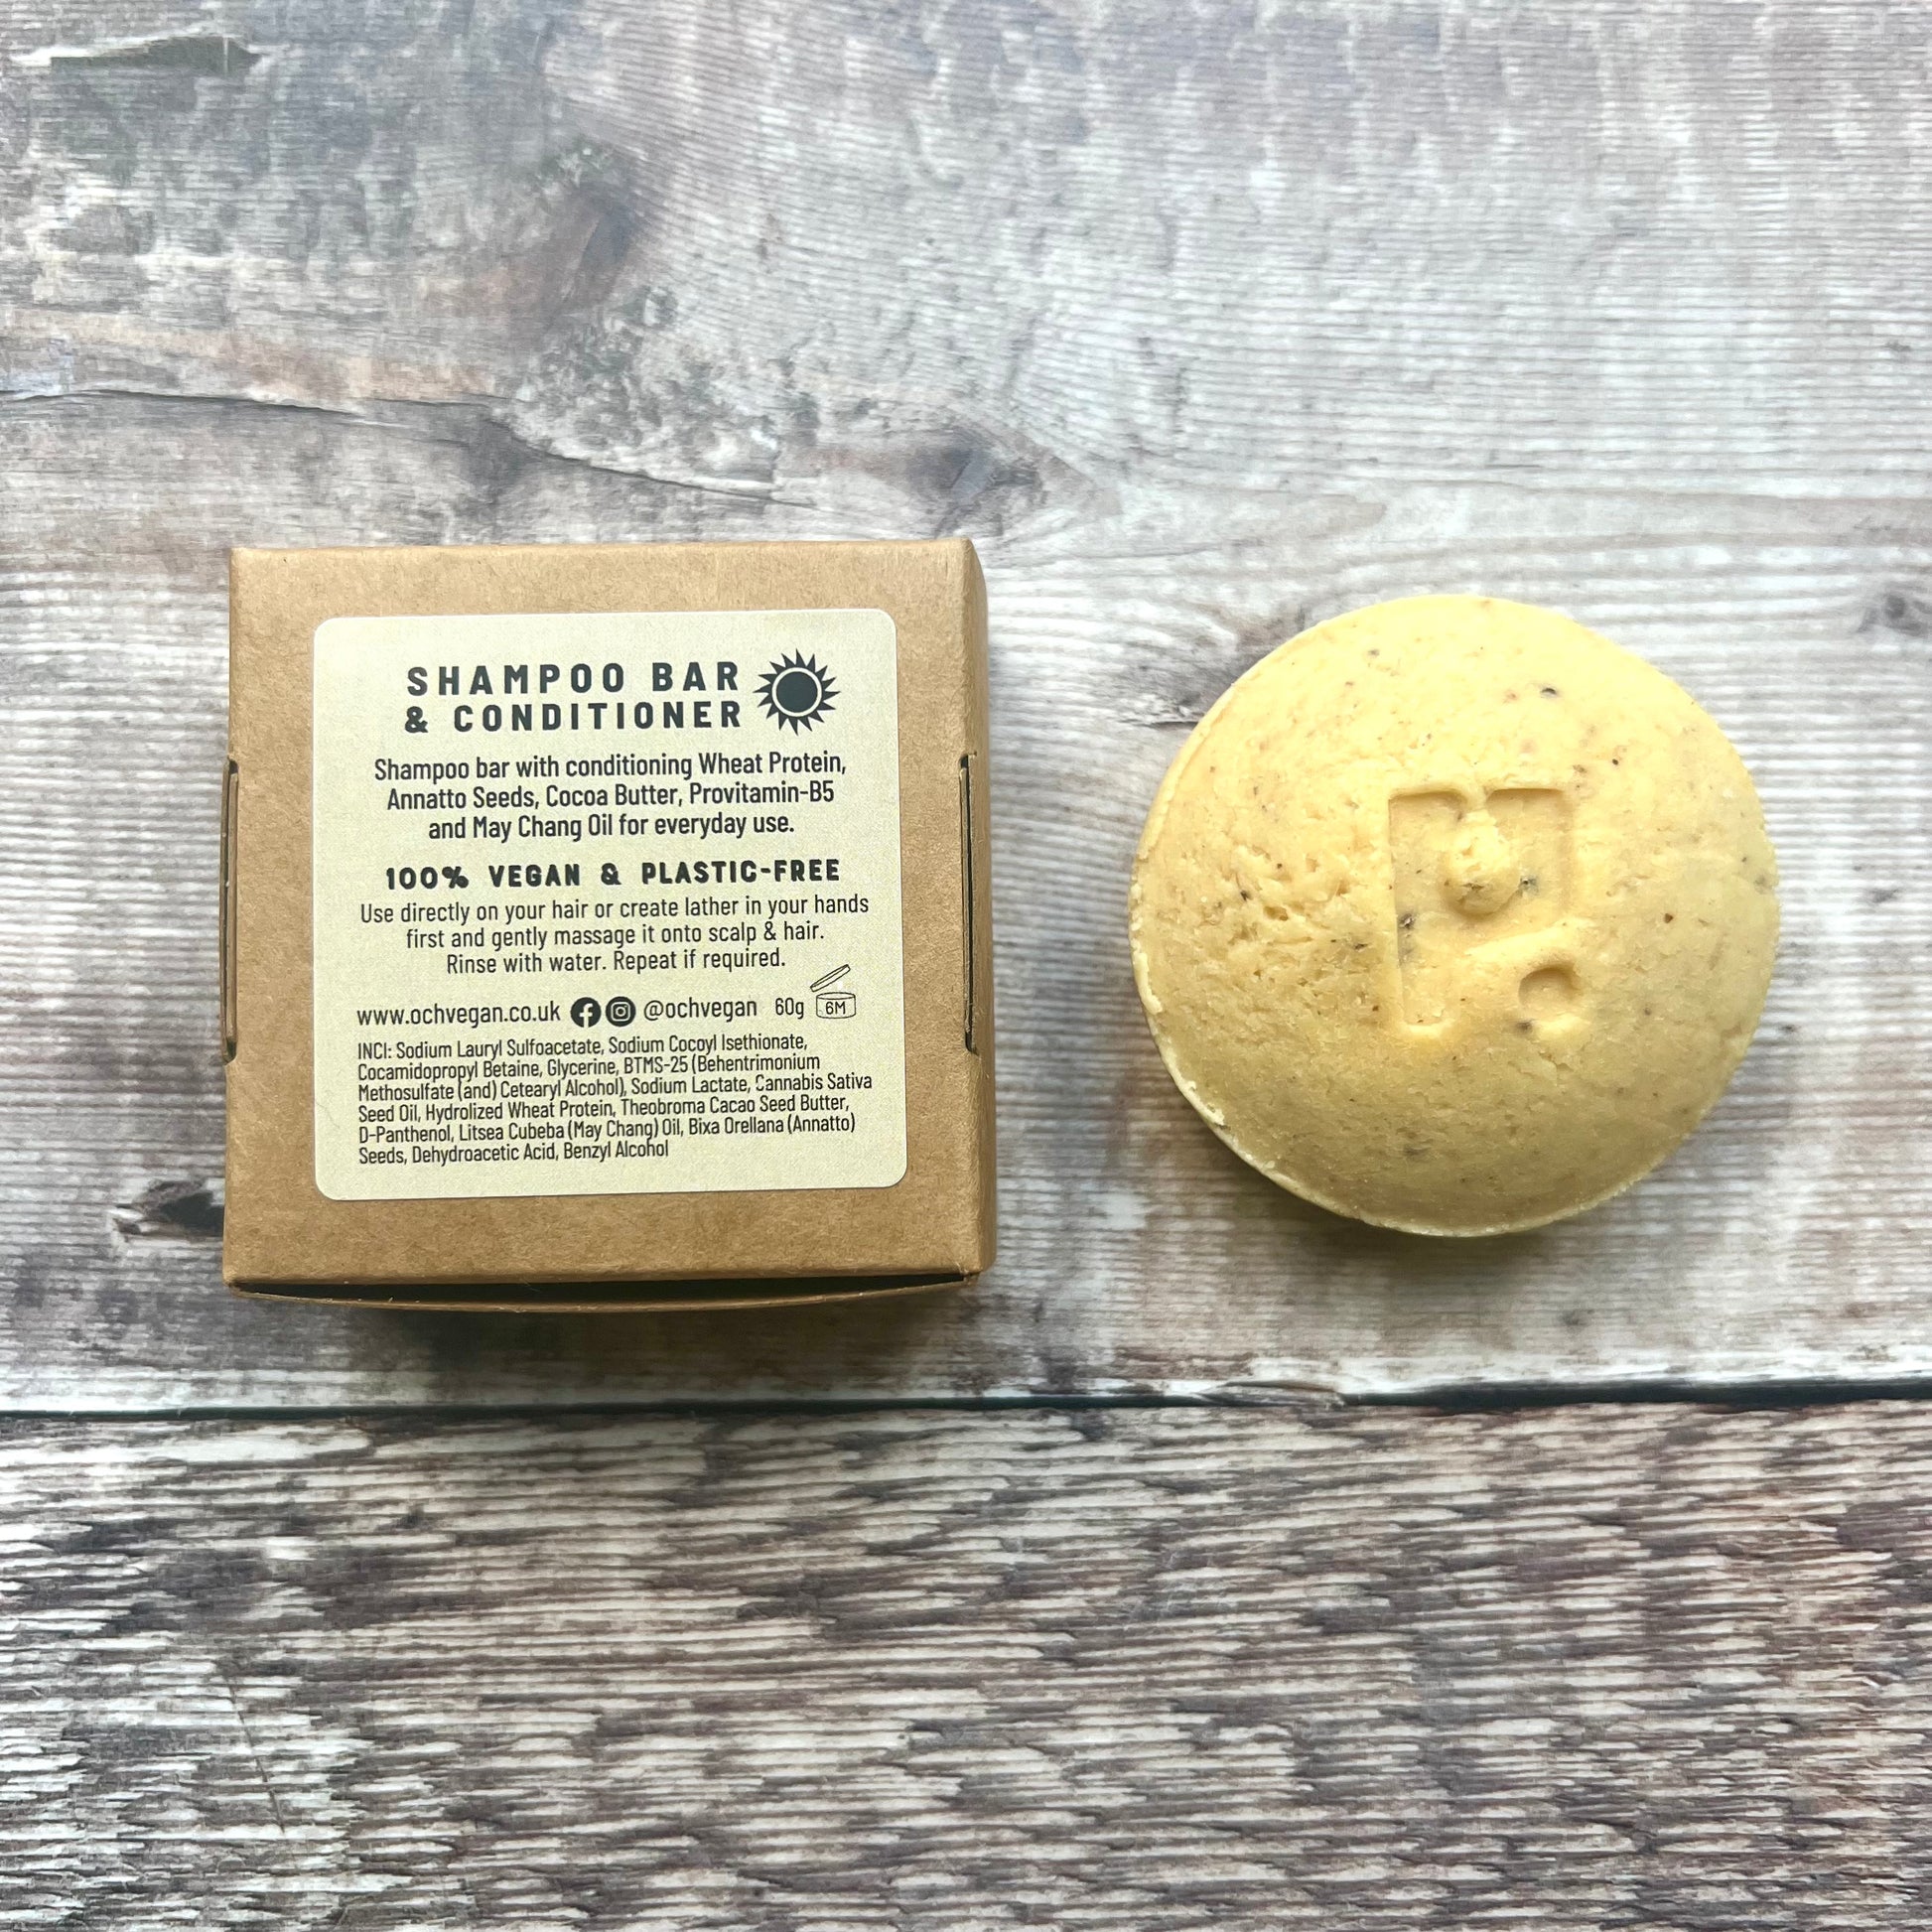 ROUND yellow shampoo bar next to back of brown paper box 